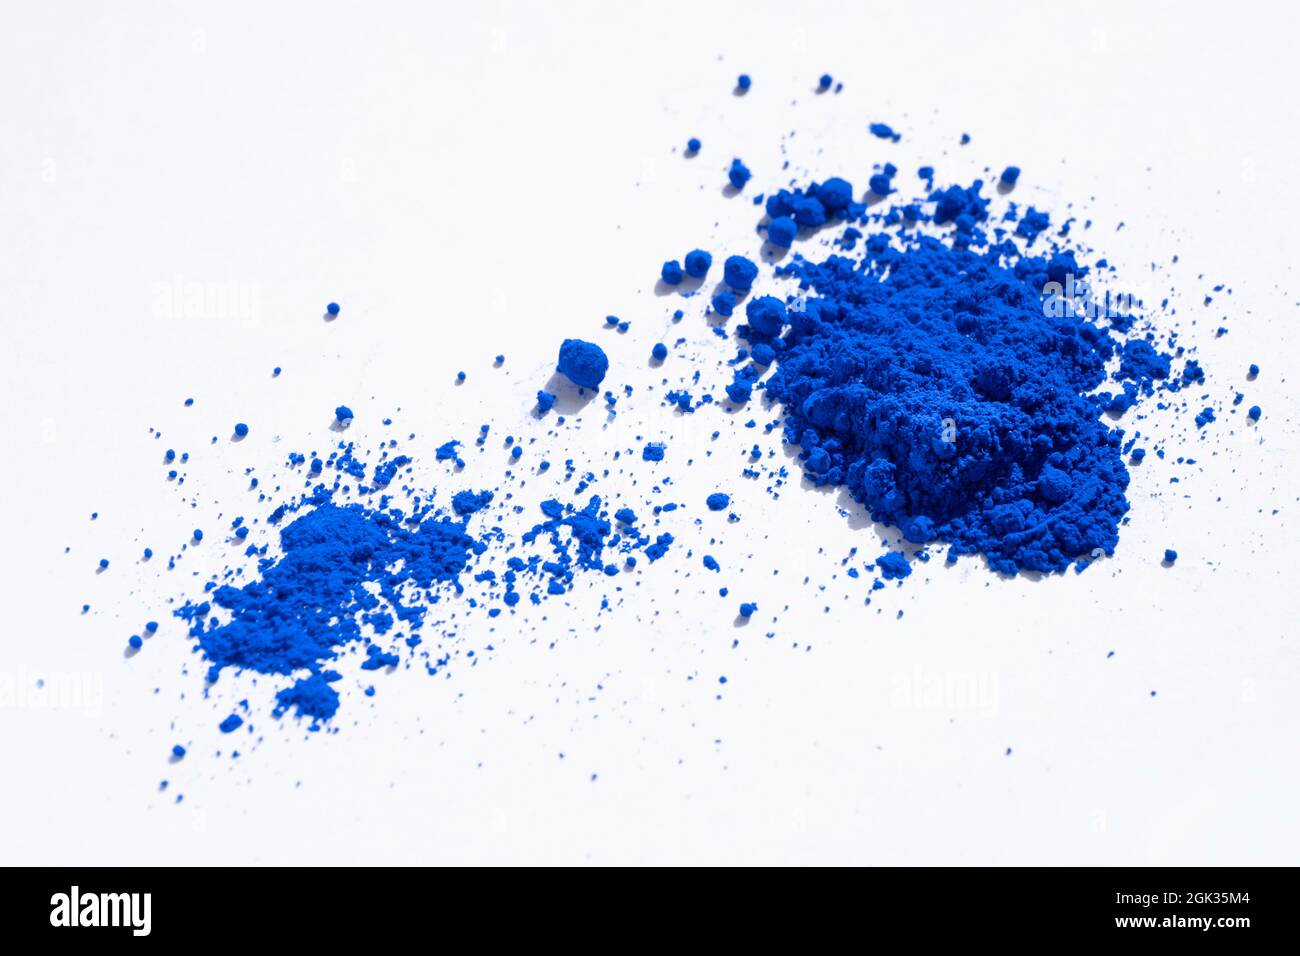 Large and small portion of ultramarine, cobalt or indigo blue pigment on  white. The pigment was mixed with linseed oil to make oli paint Stock Photo  - Alamy